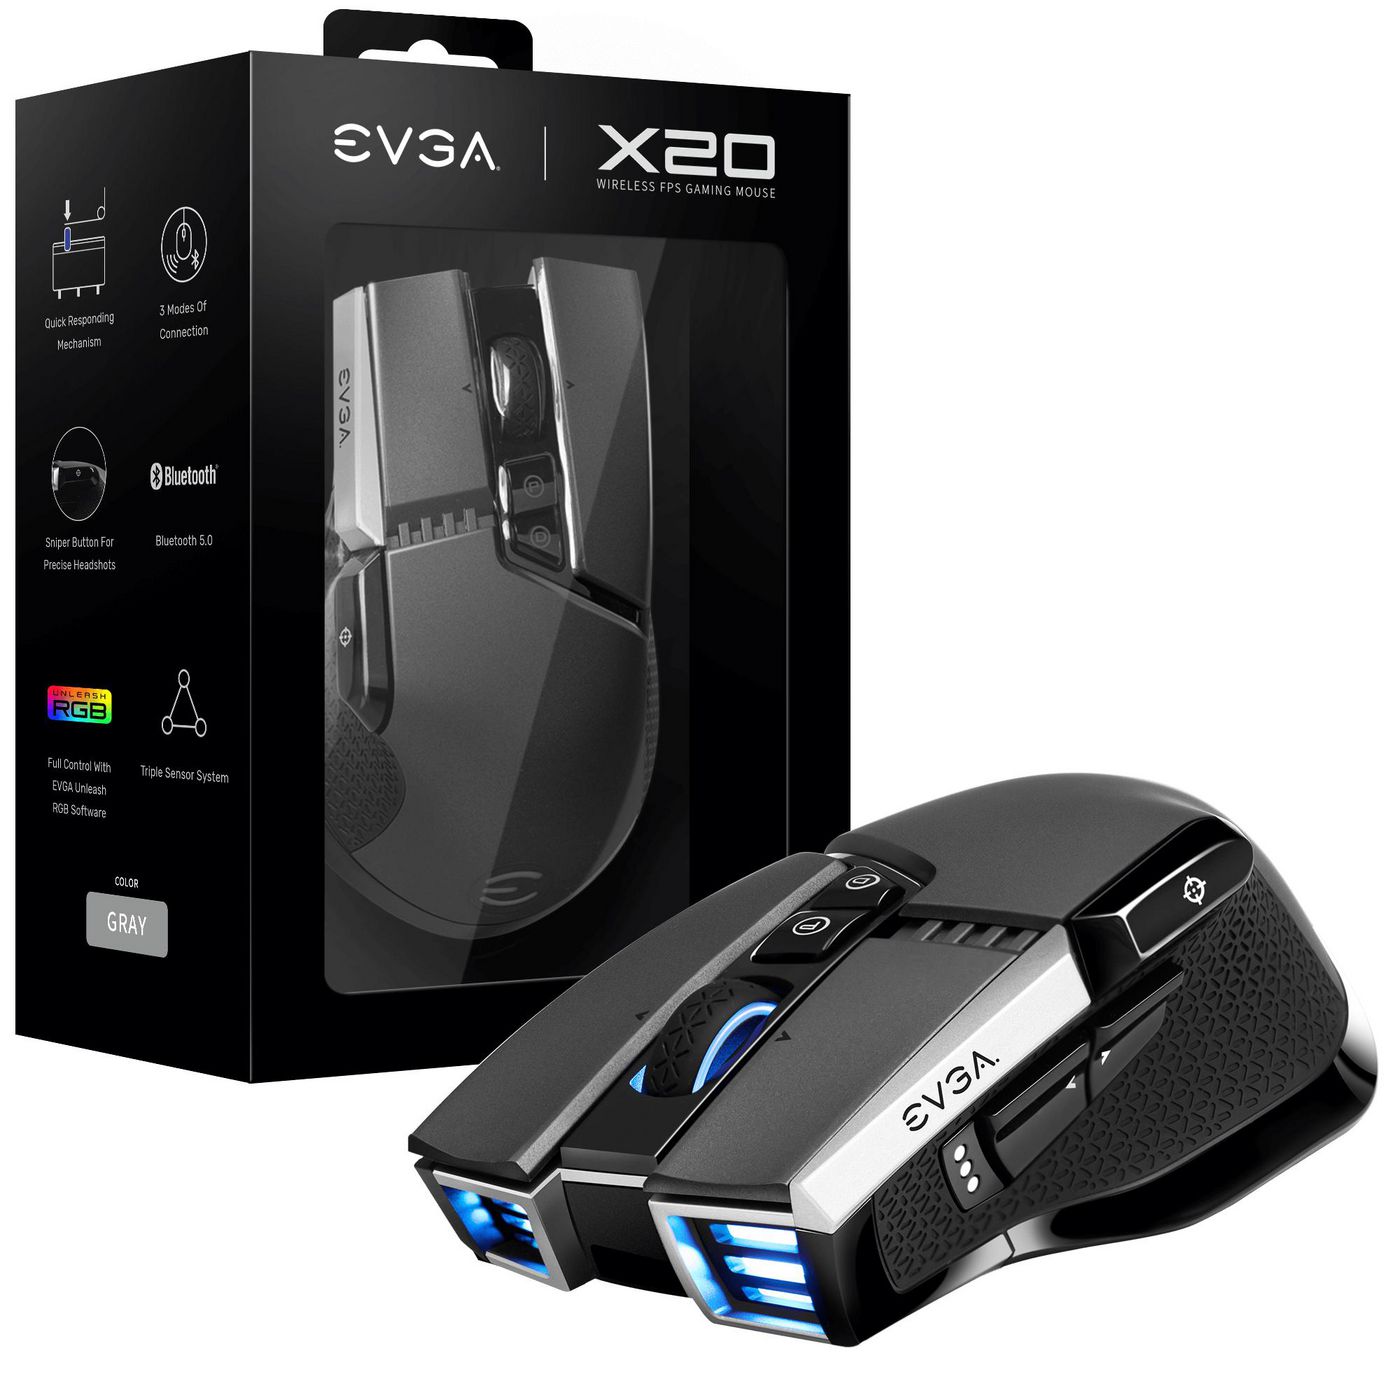 EVGA 903-T1-20GR-K3 W128273870 X20 Mouse Right-Hand Rf 